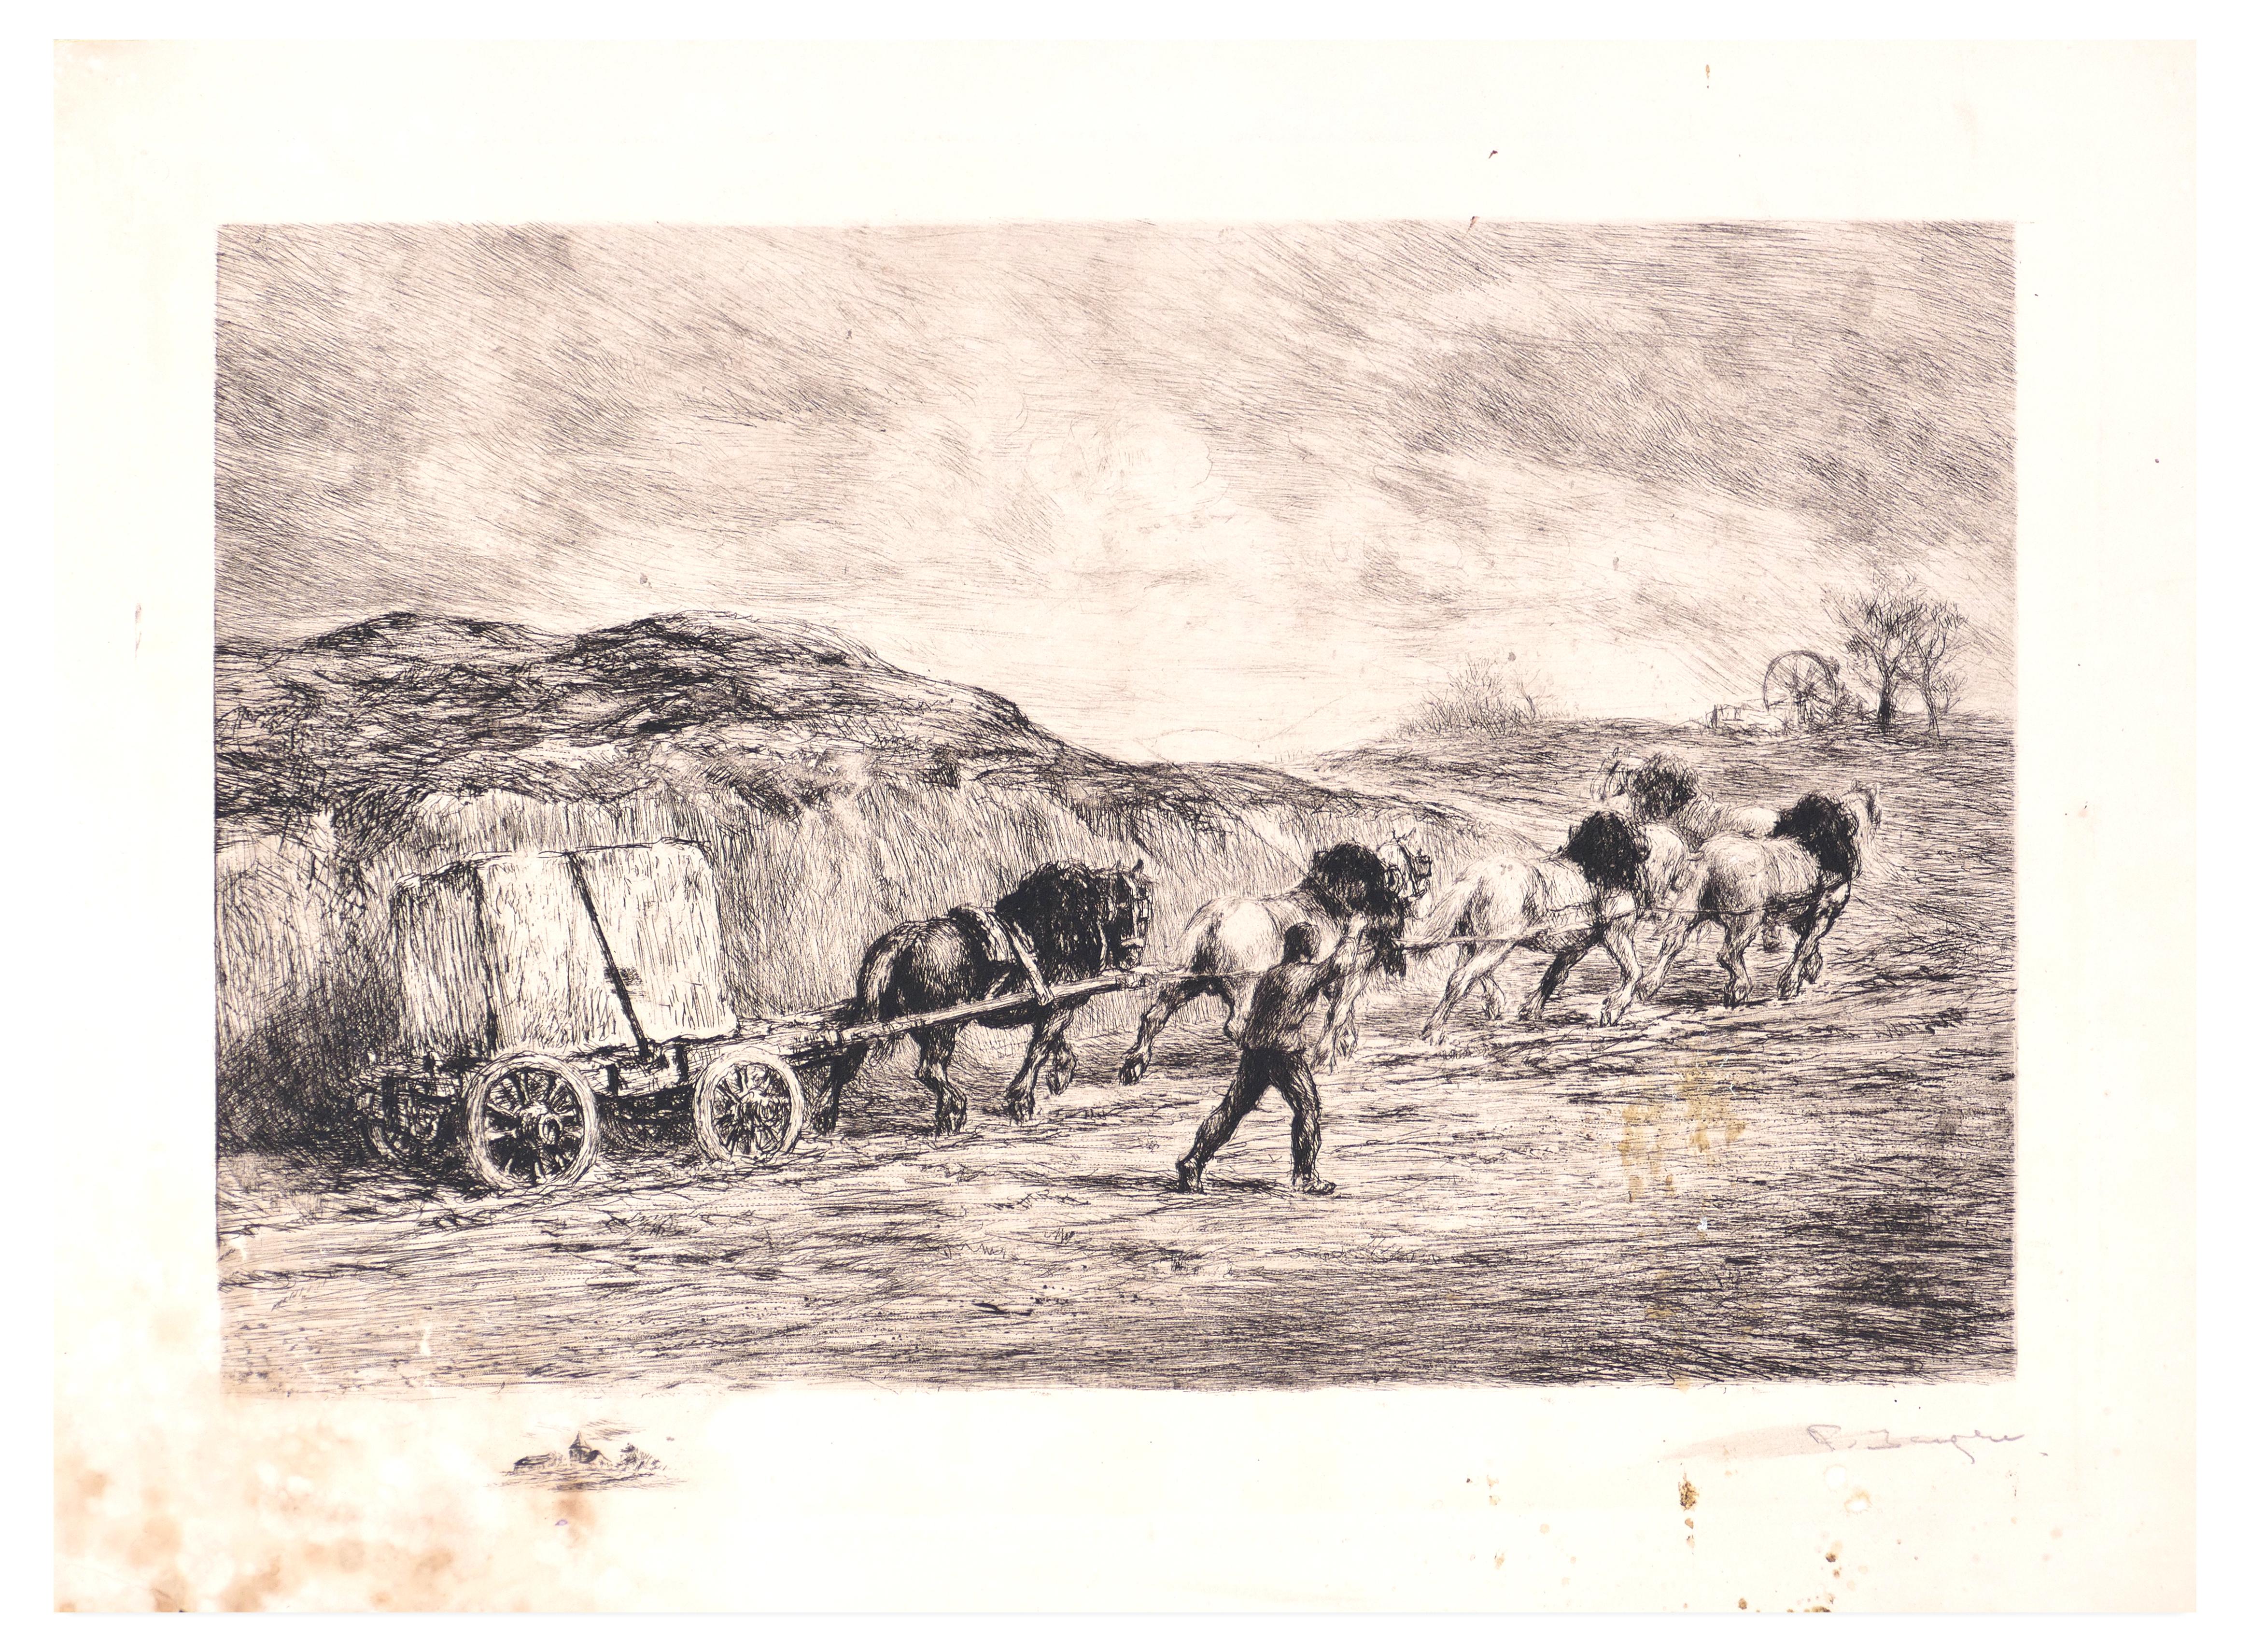 Frédéric Jacque Animal Print - Horse Team - Original Etching by F. Jacque - Late 19th Century